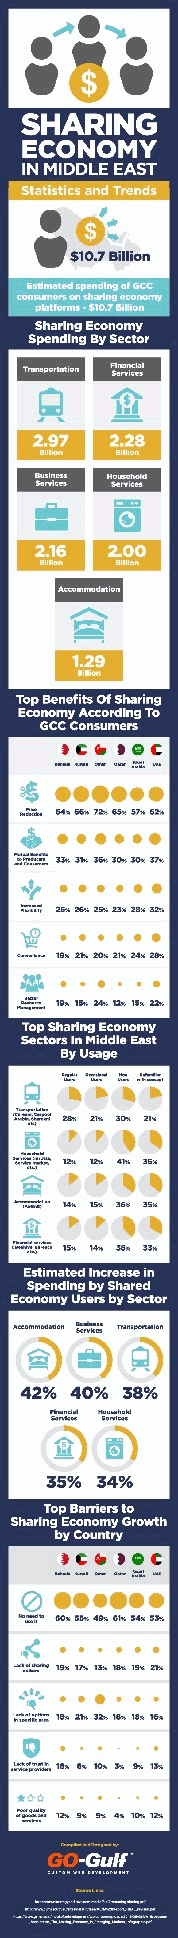 Sharing Economy in Middle East – Statistics and Trends [Infographic]